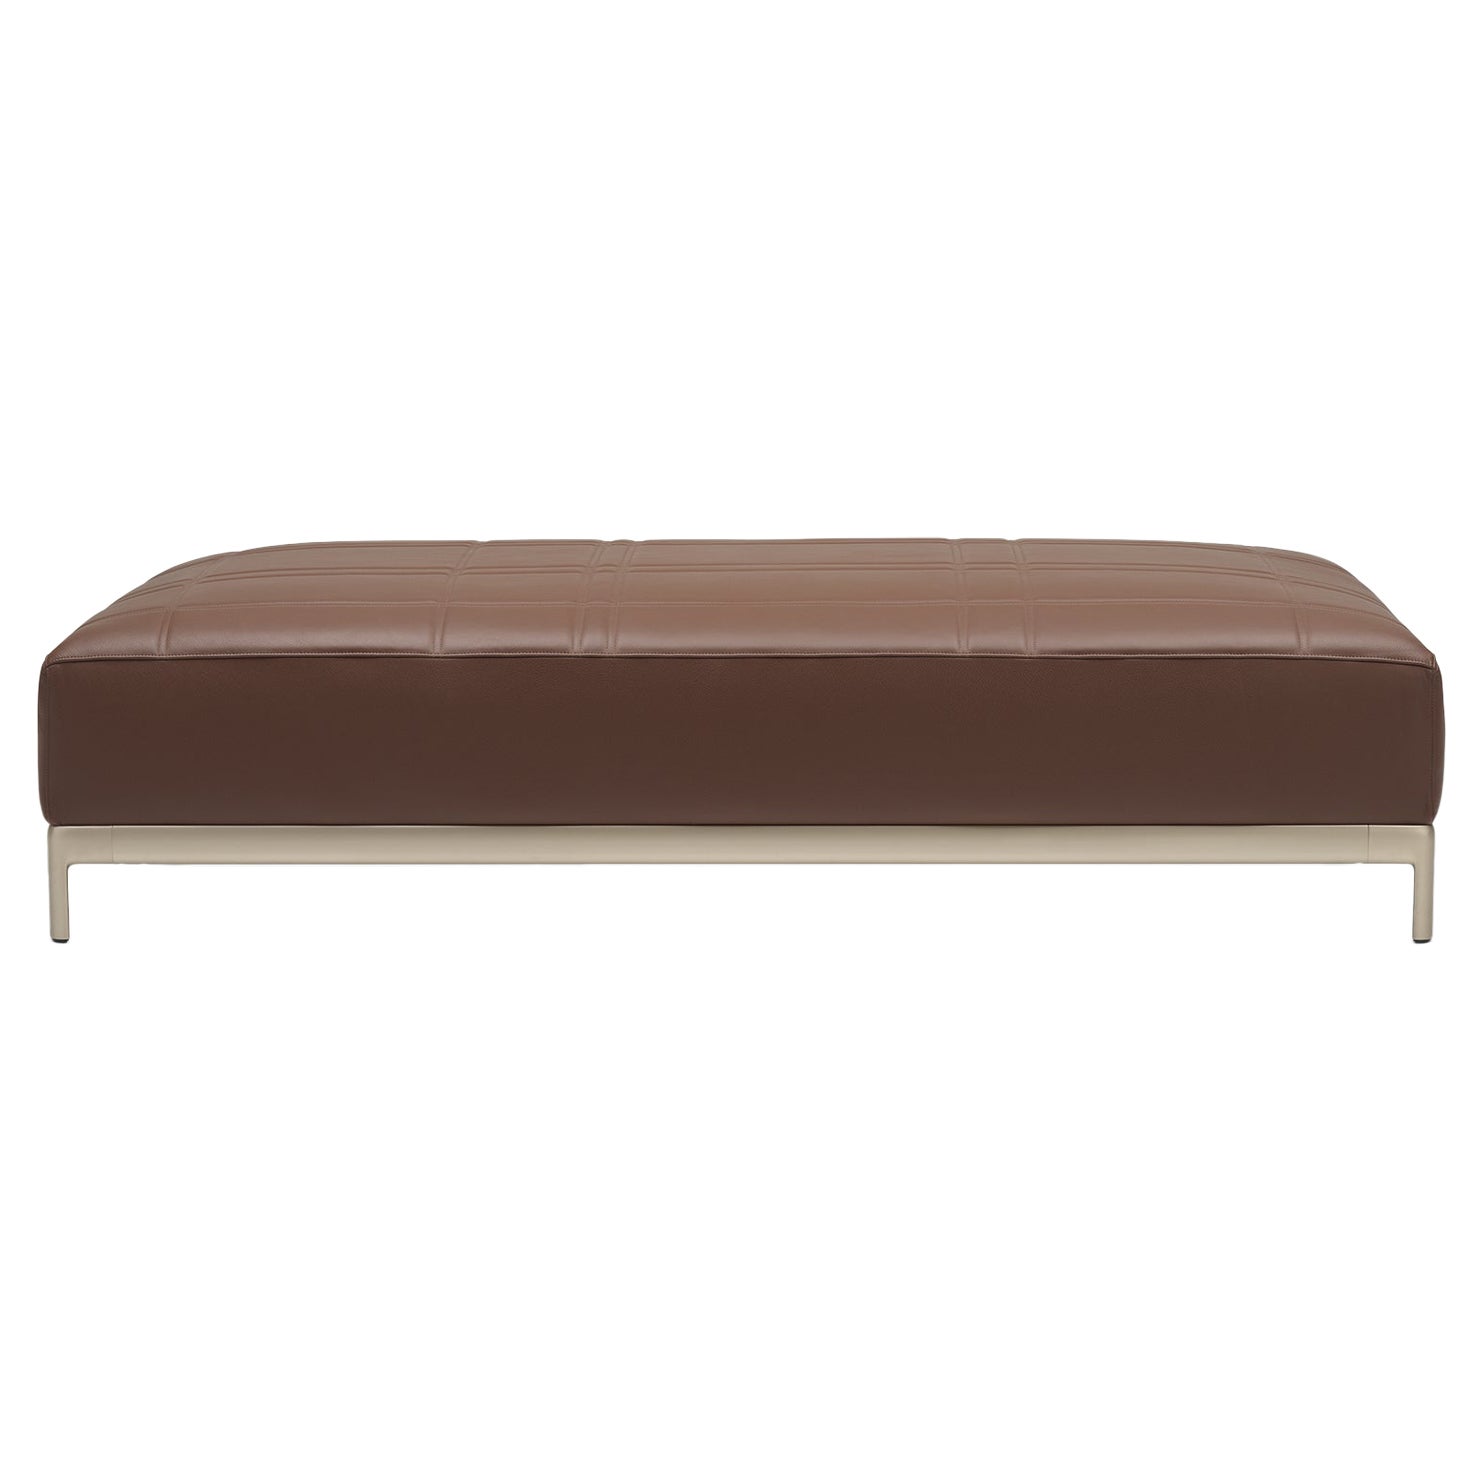 Alias P52 AluZen Soft Bench in Brown Leather Seat and Anodized Gold Frame